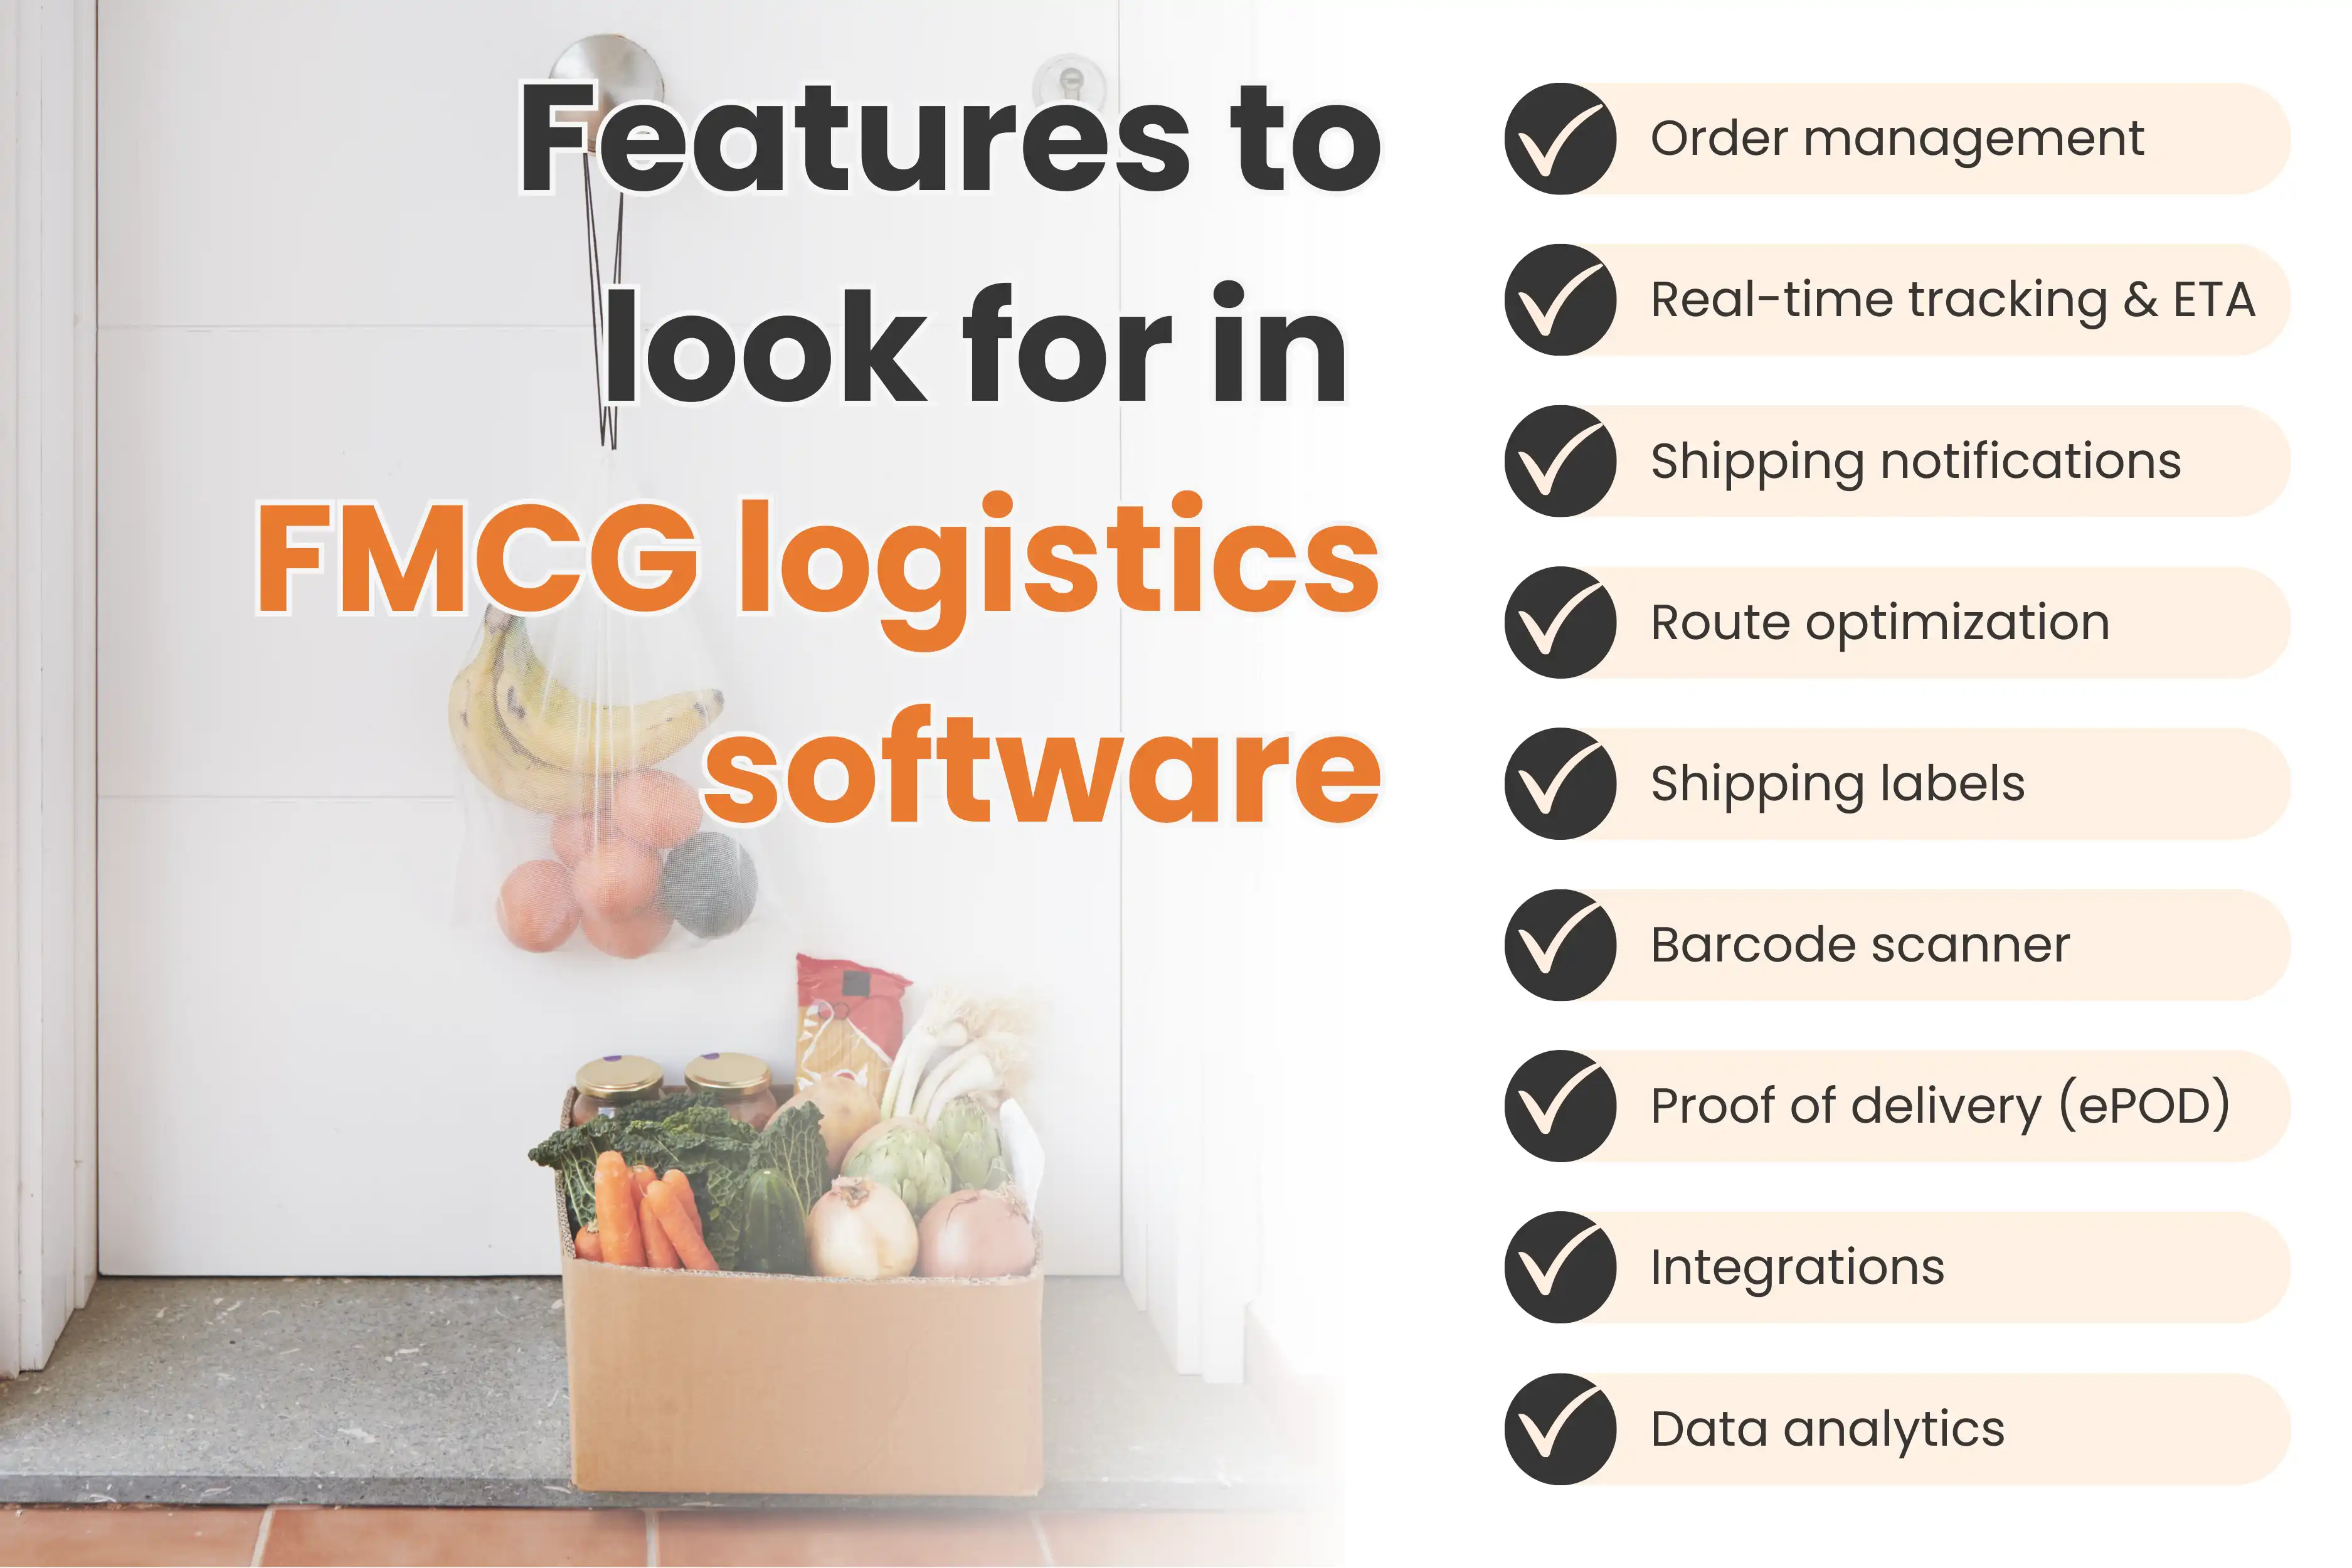 key features of FMCG software for logistics